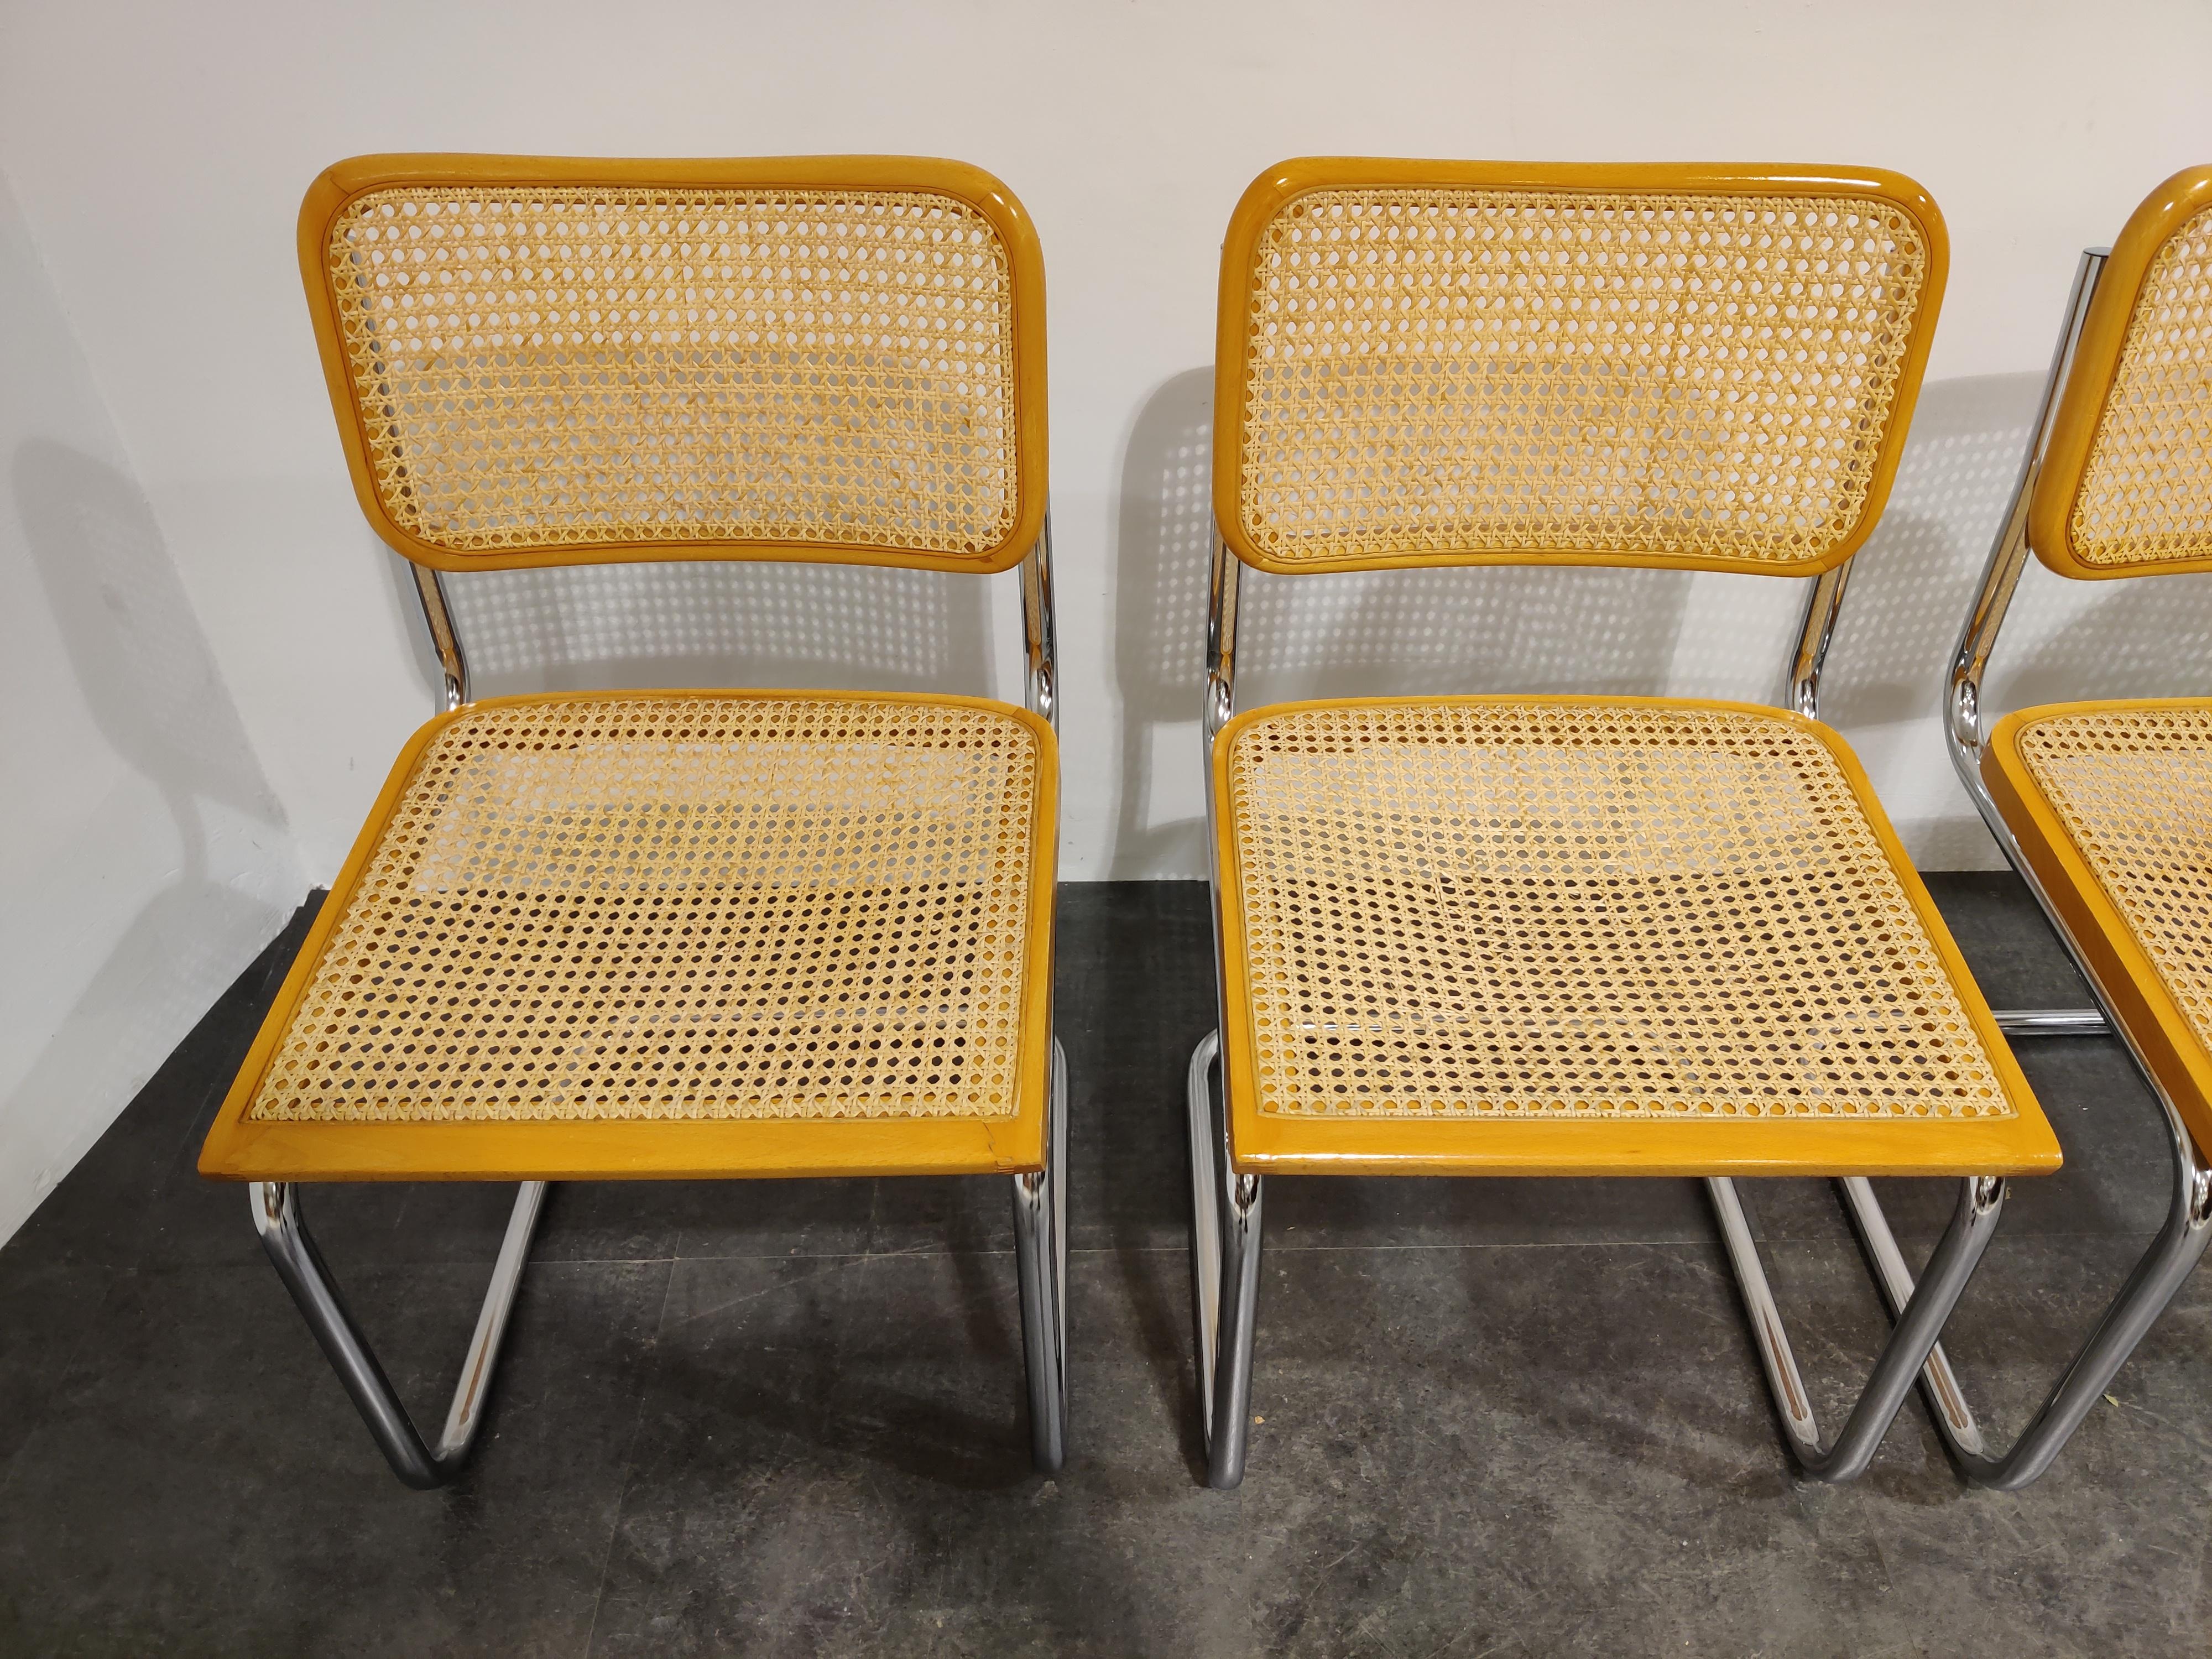 Late 20th Century Set of 4 Vintage Marcel Breuer Cesca Chairs, Made in Italy, 1970s